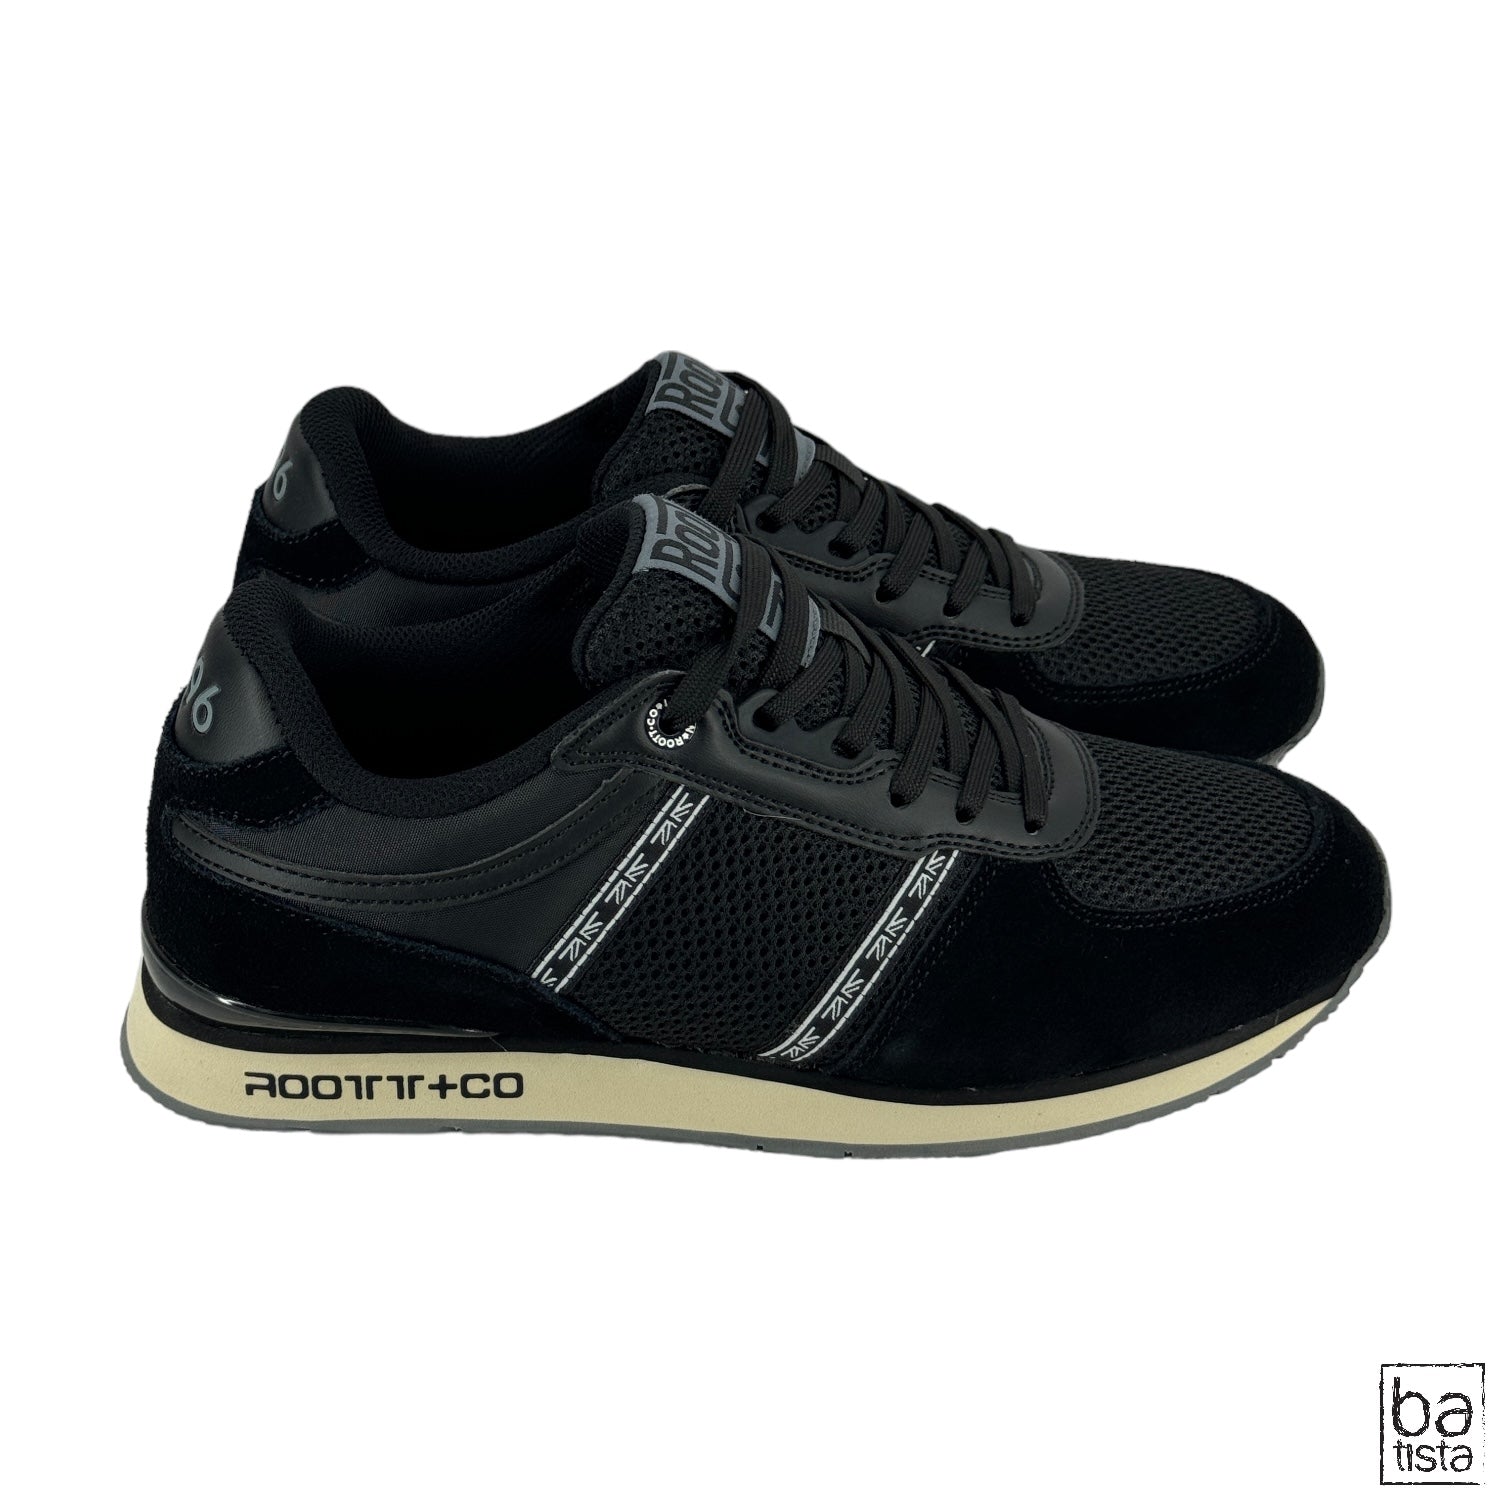 Zapatos Roott + Co 89032